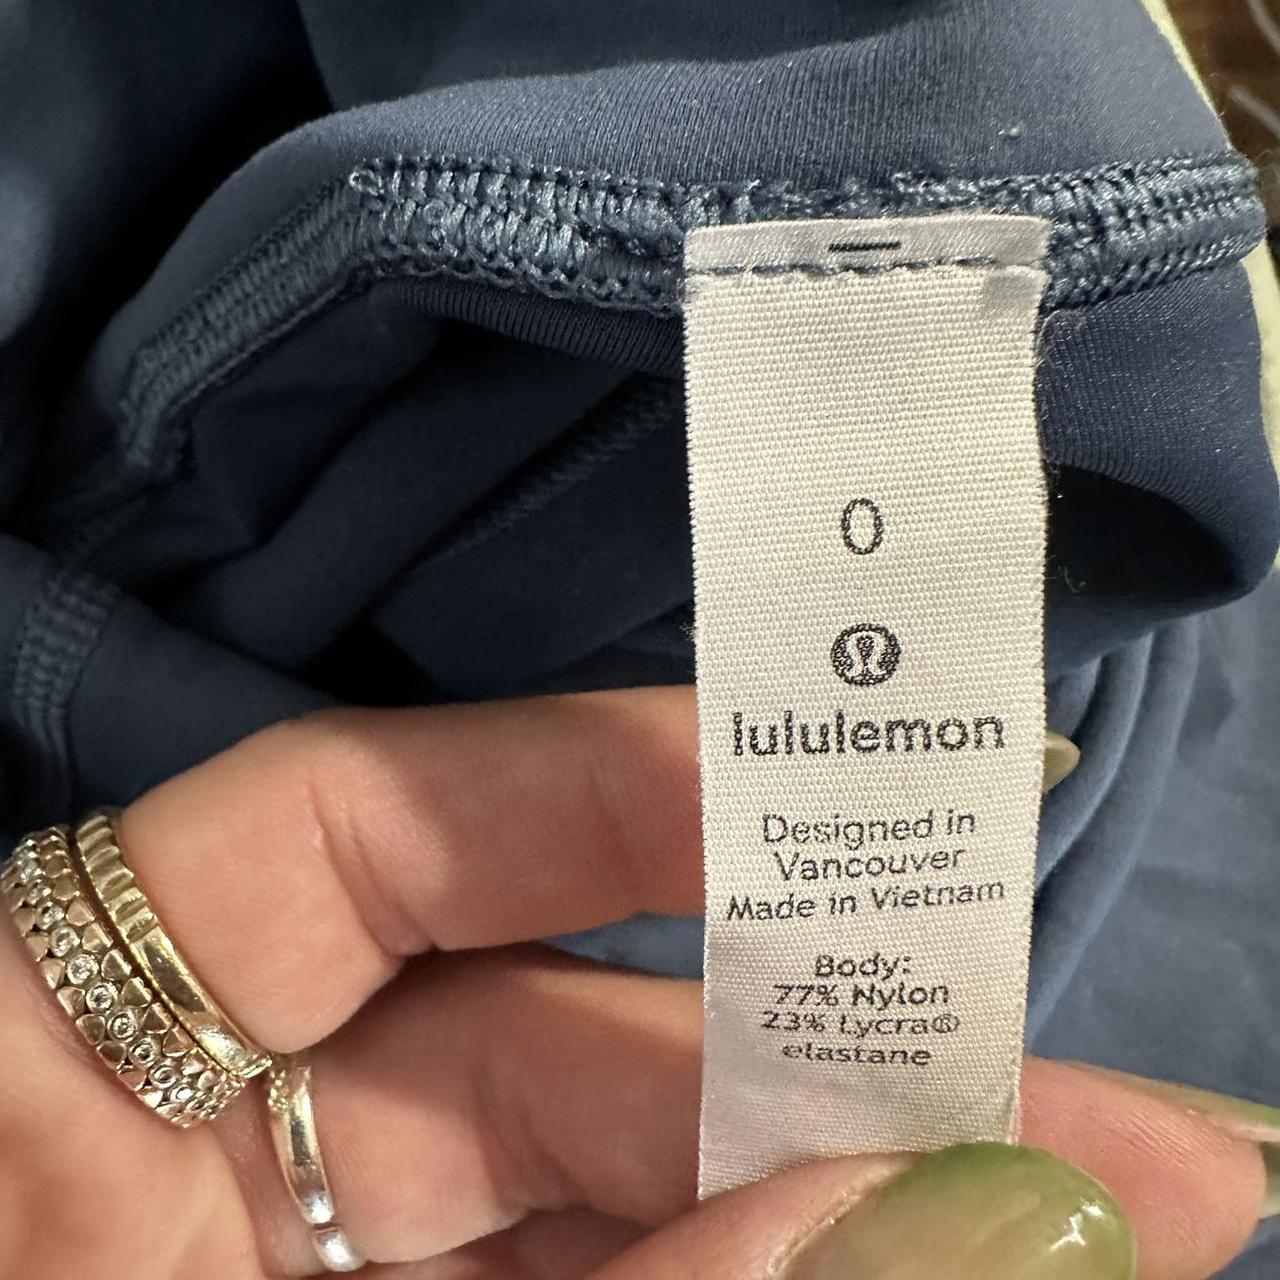 Lululemon leggings, Size 0!, Inseam is 23 inches and